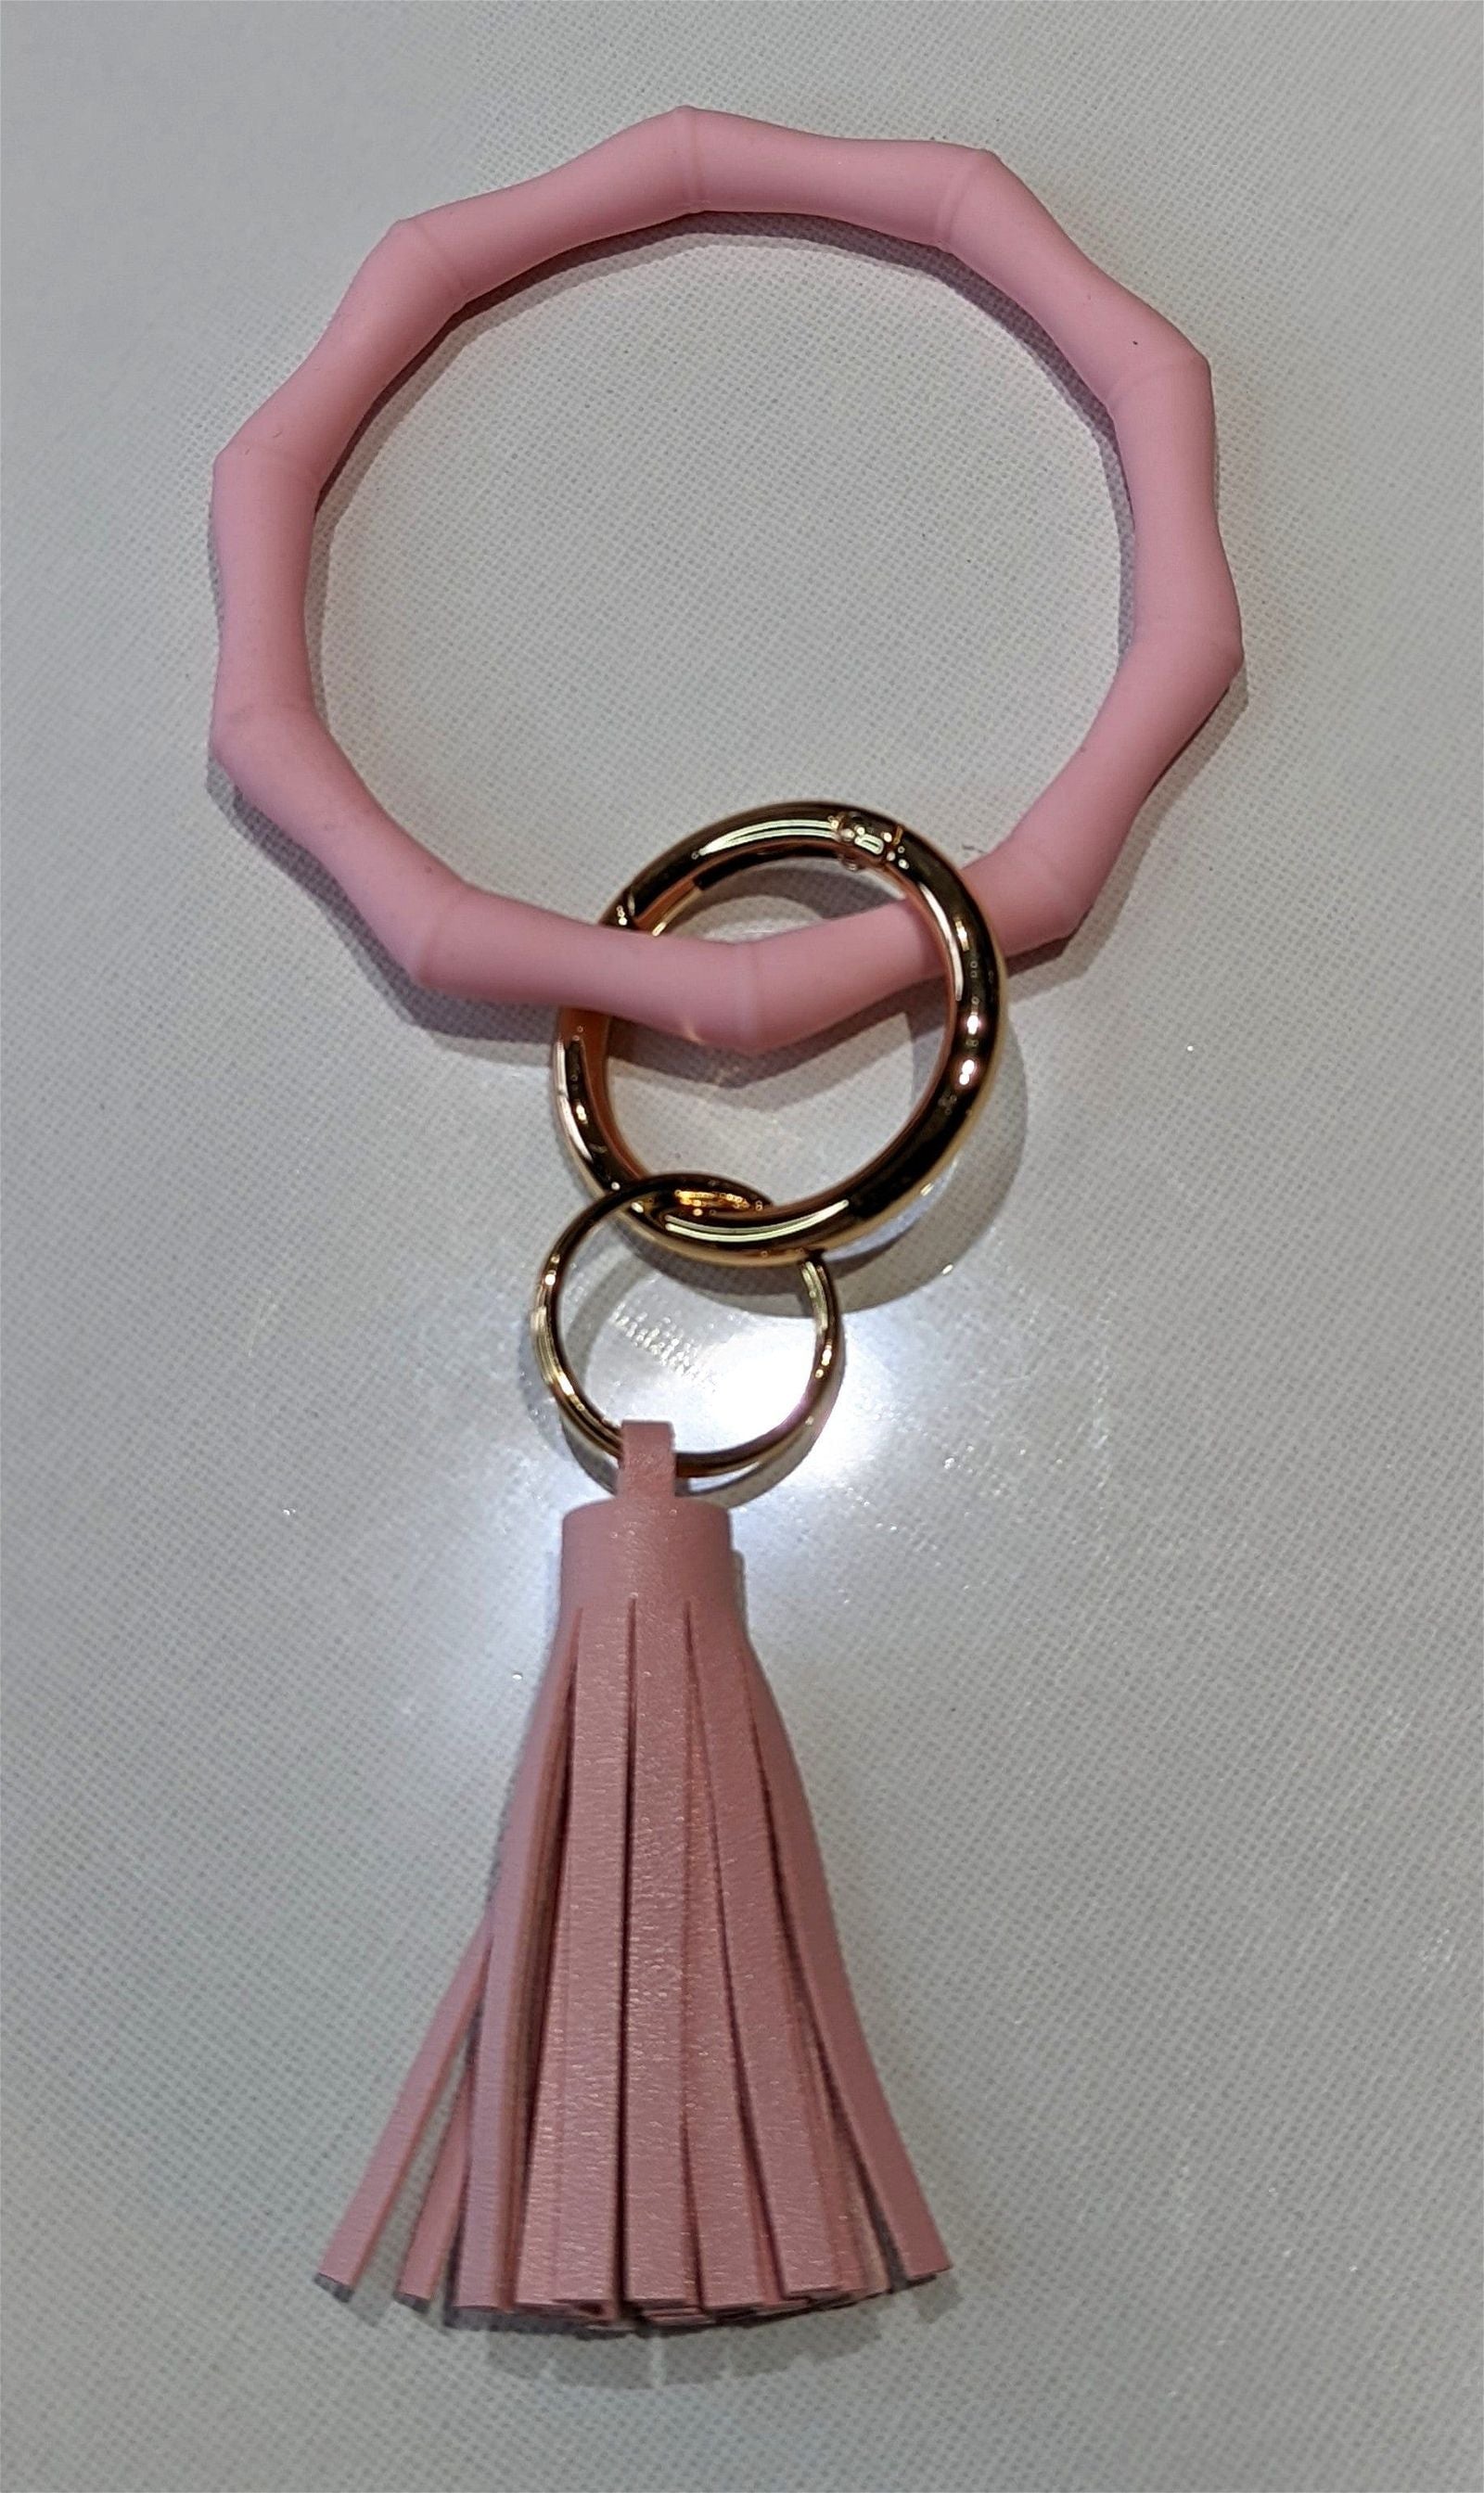 Wristlet Keychain - Maily's Classic Accessories